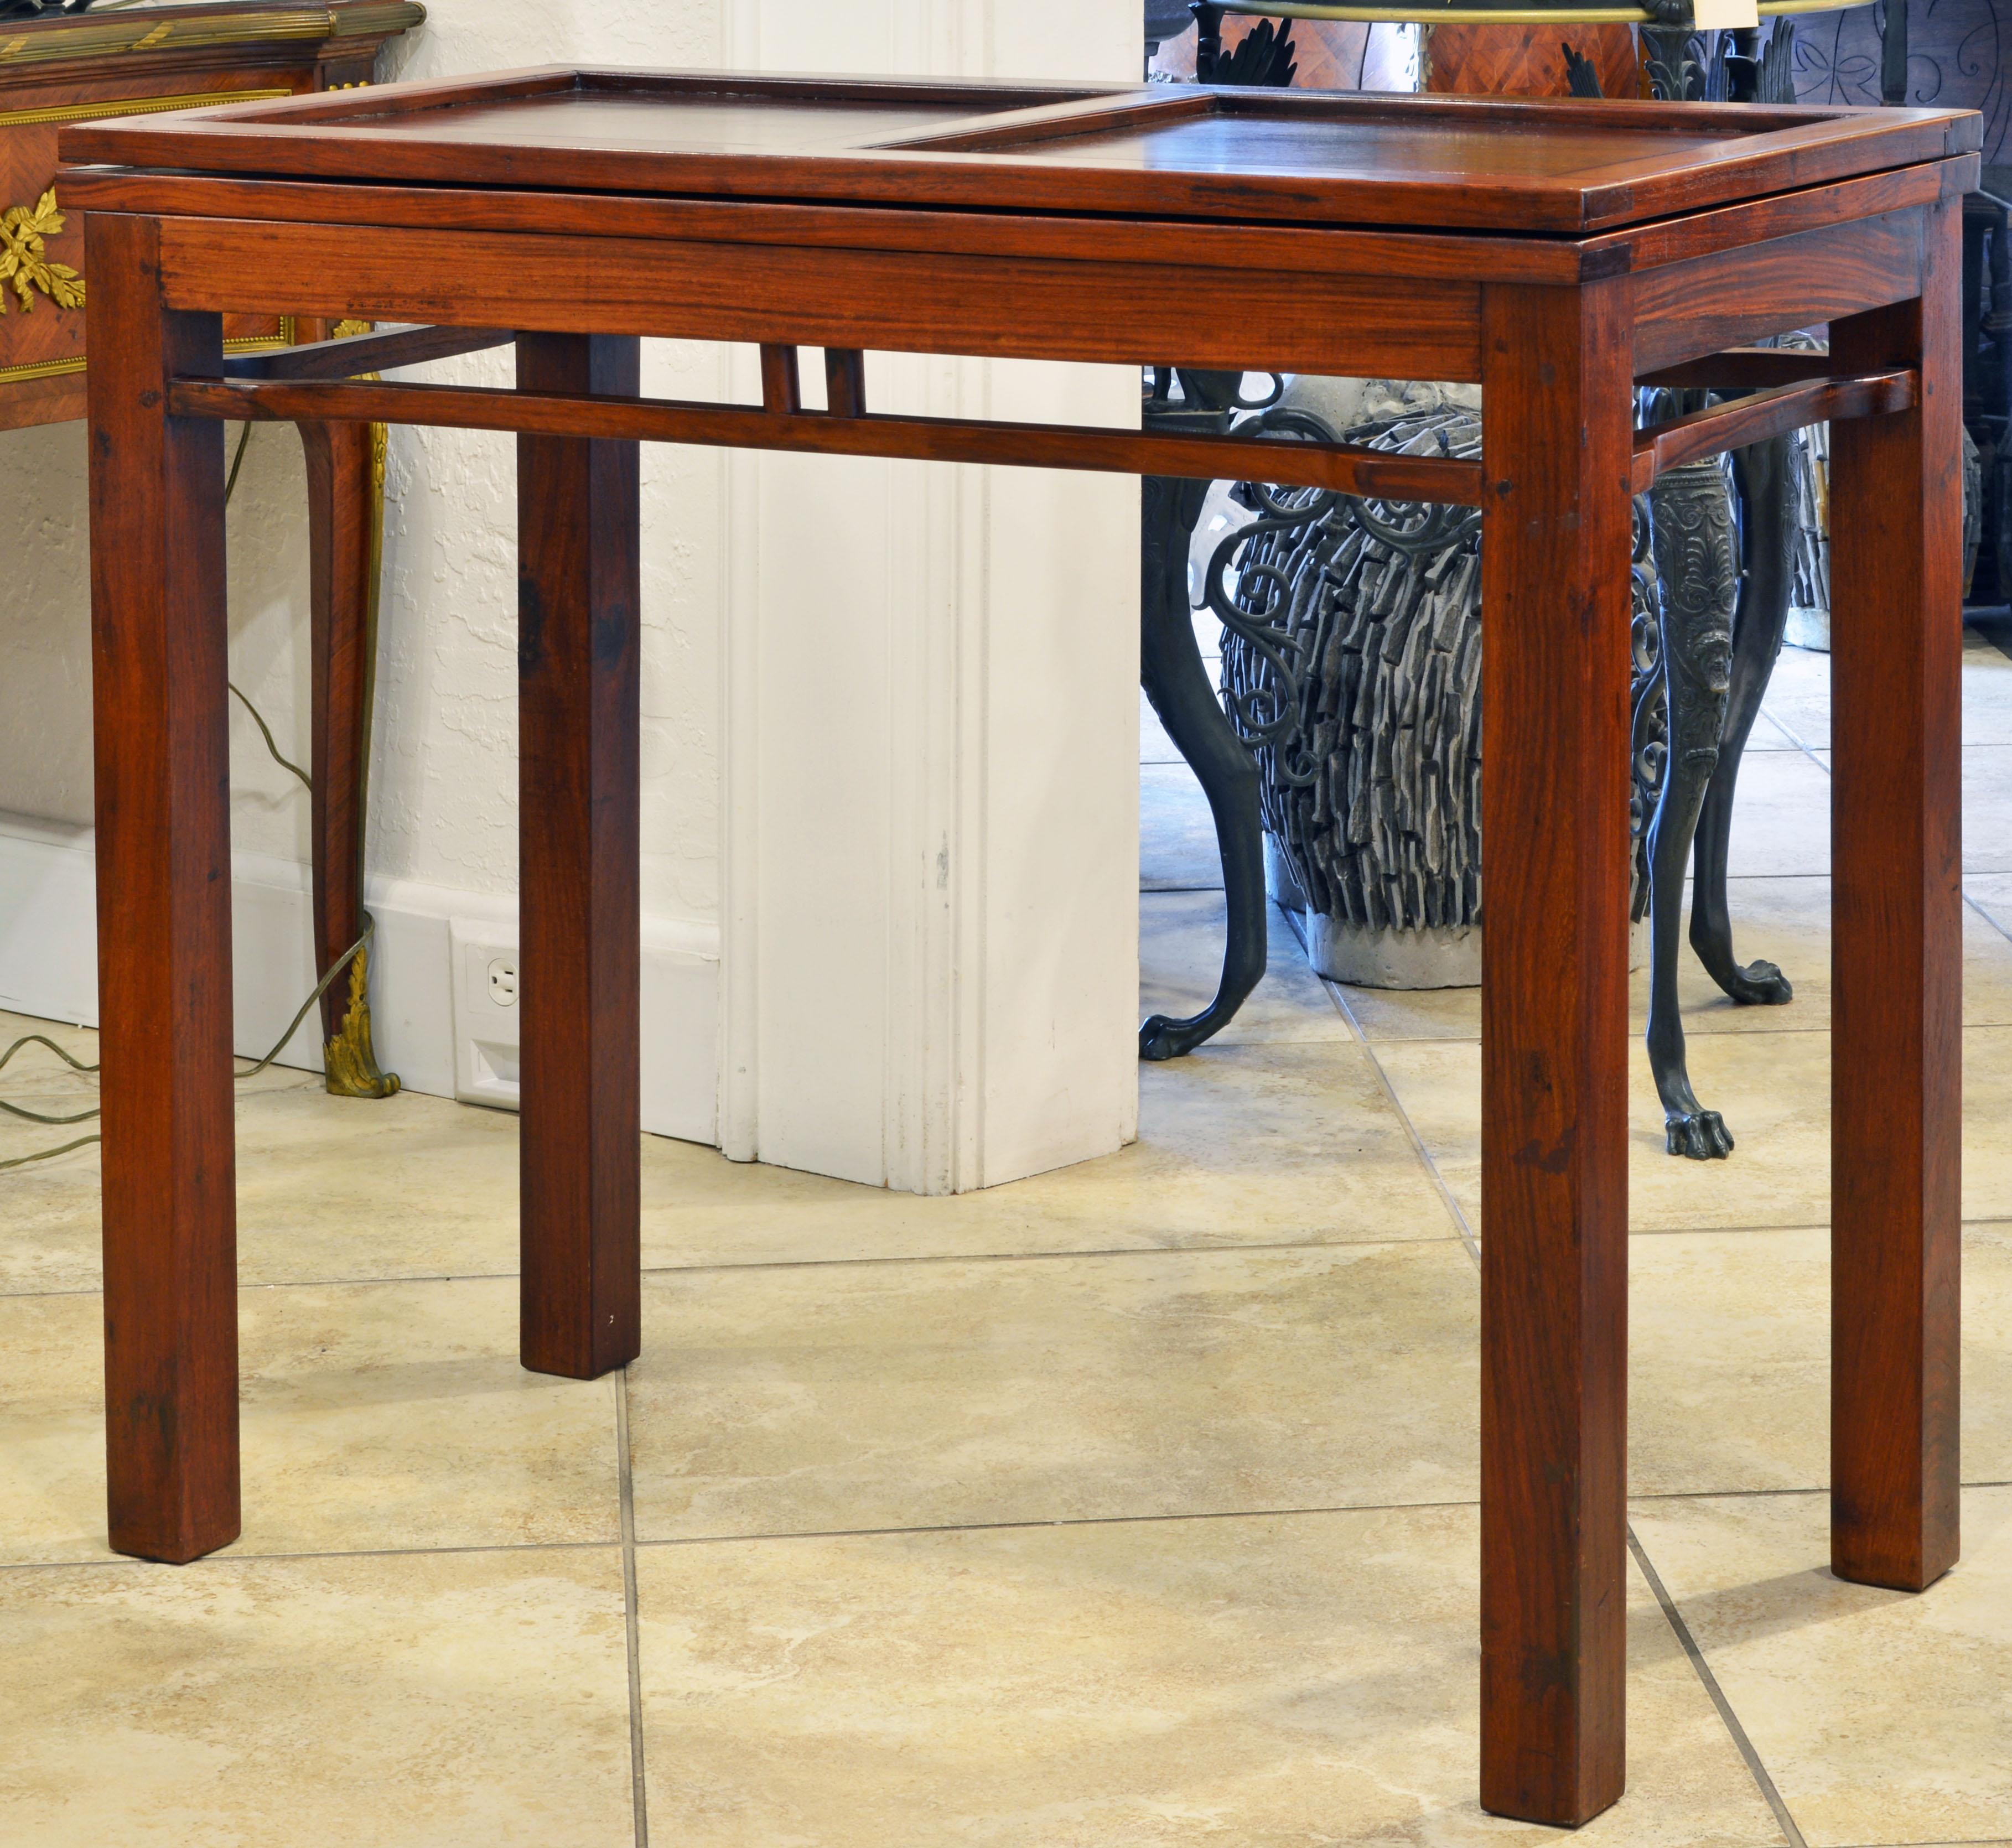 Fashioned in the classical Ming style with corner legs, small frieze and humpback stretchers these game table is a more modern elegant translation of the old Chinese tradition. Great craftsmanship in construction as well as in the four delicate